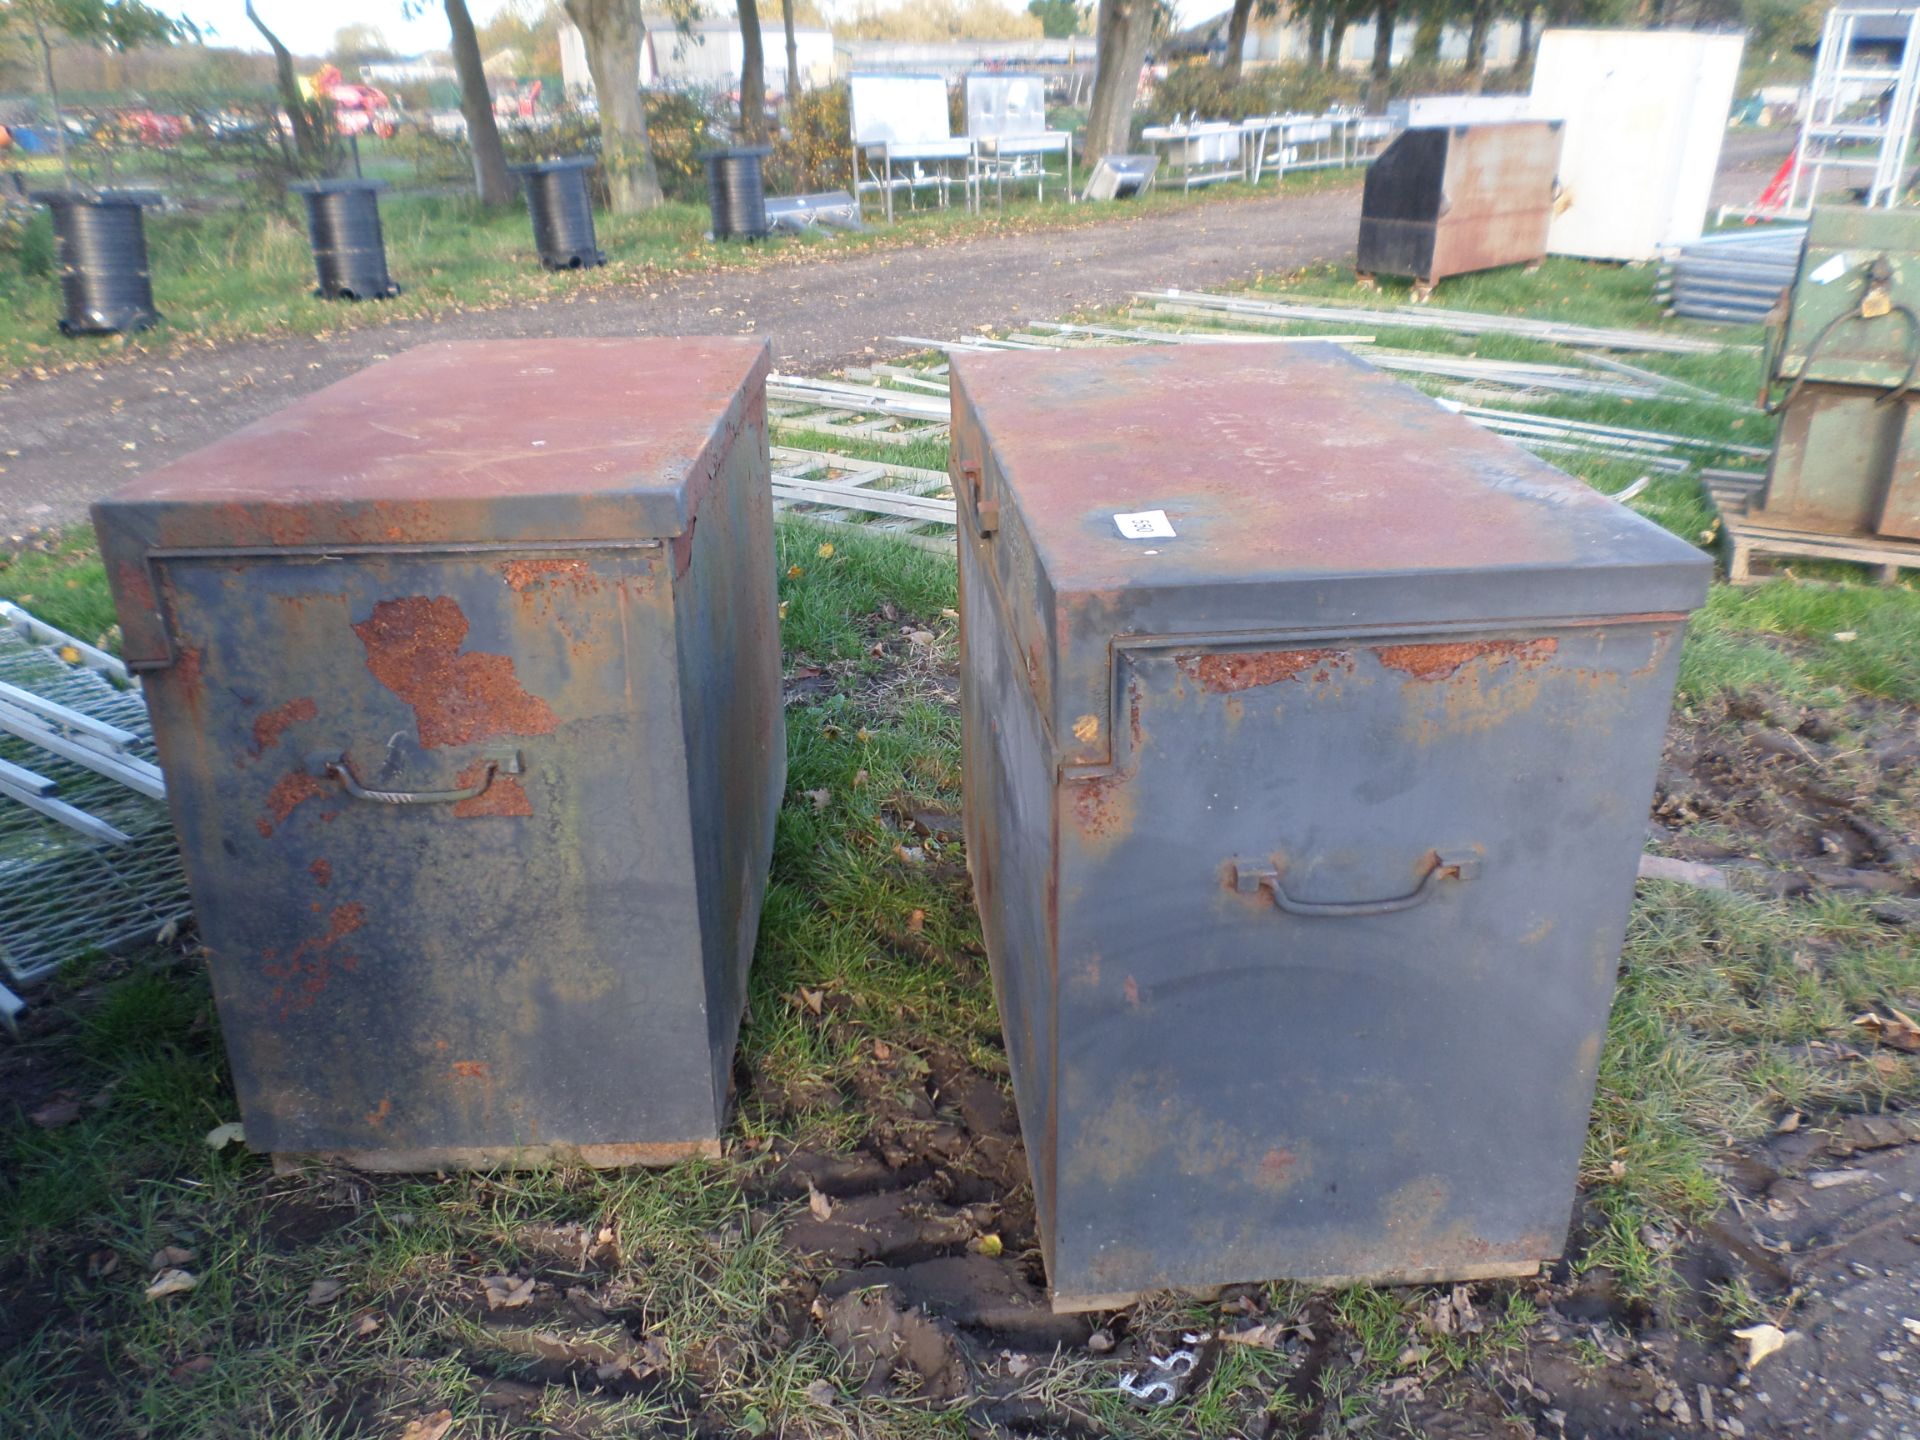 2 steel tool boxes